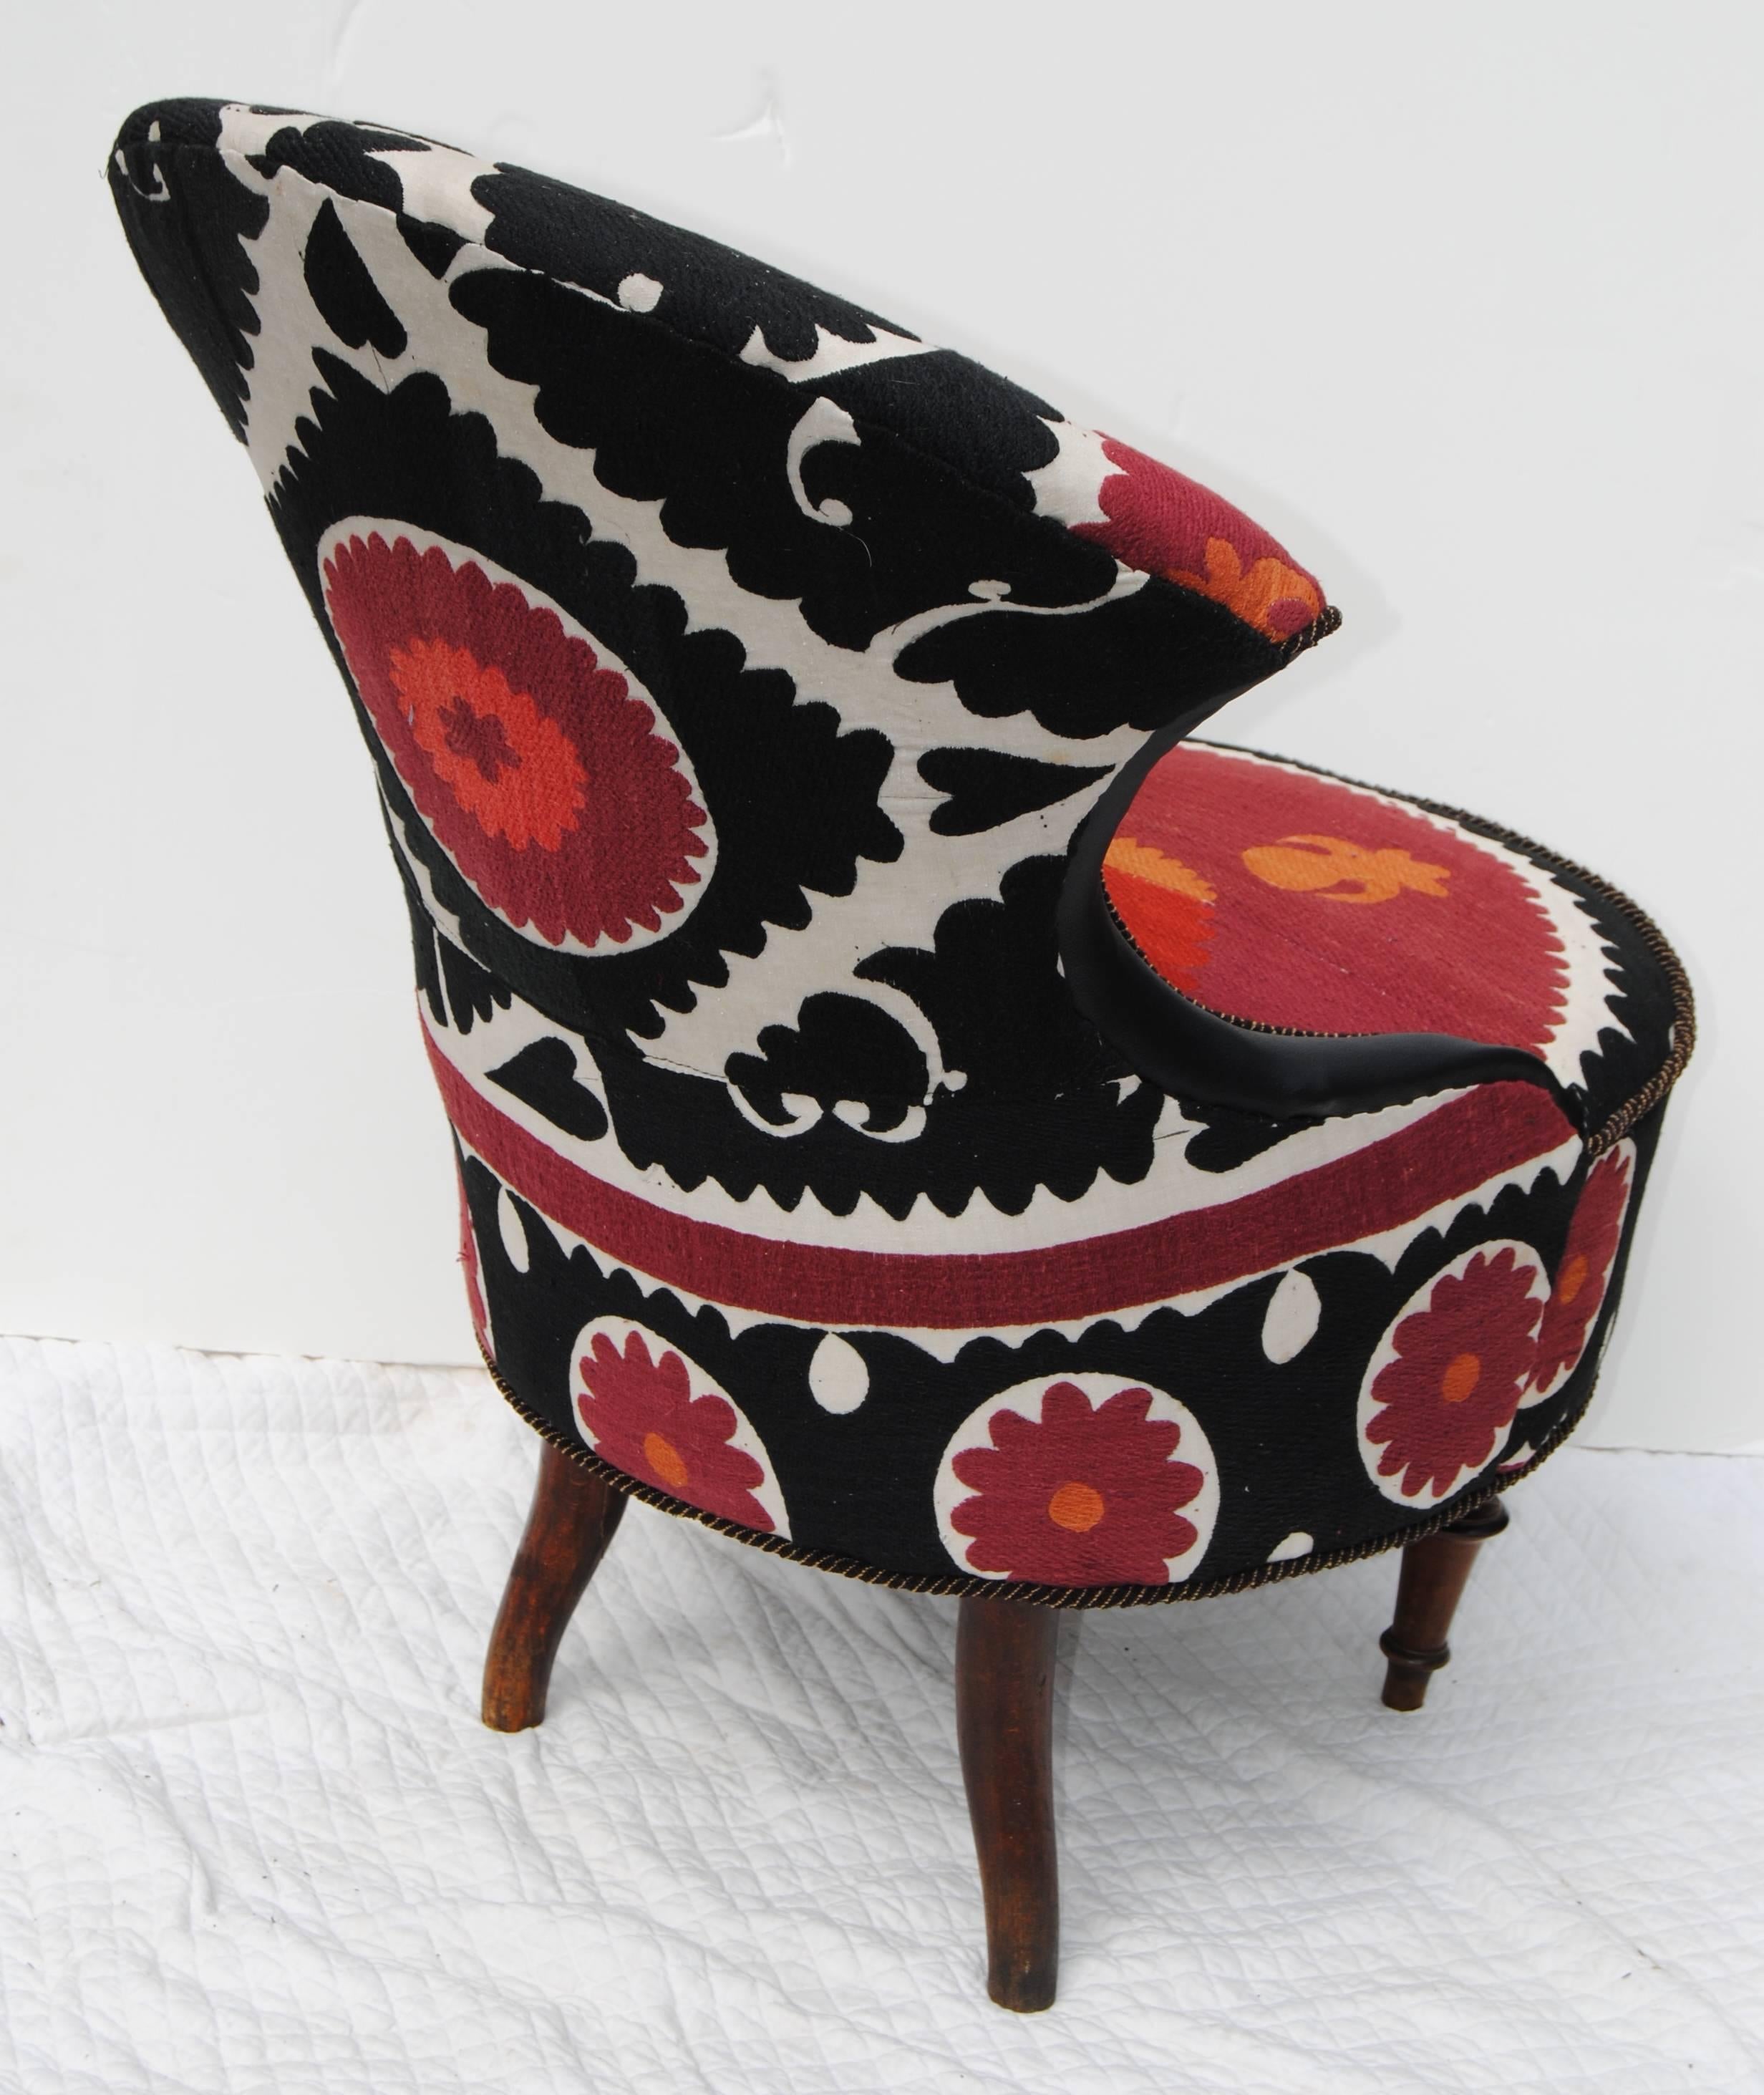 Antique European chair, circa mid-late 1800s, restored and newly upholstered in a vintage hand embroidered Suzani textile. This is a small-scale chair with very unusual design details, a piece of Folk Art with curved lines accented by the placement